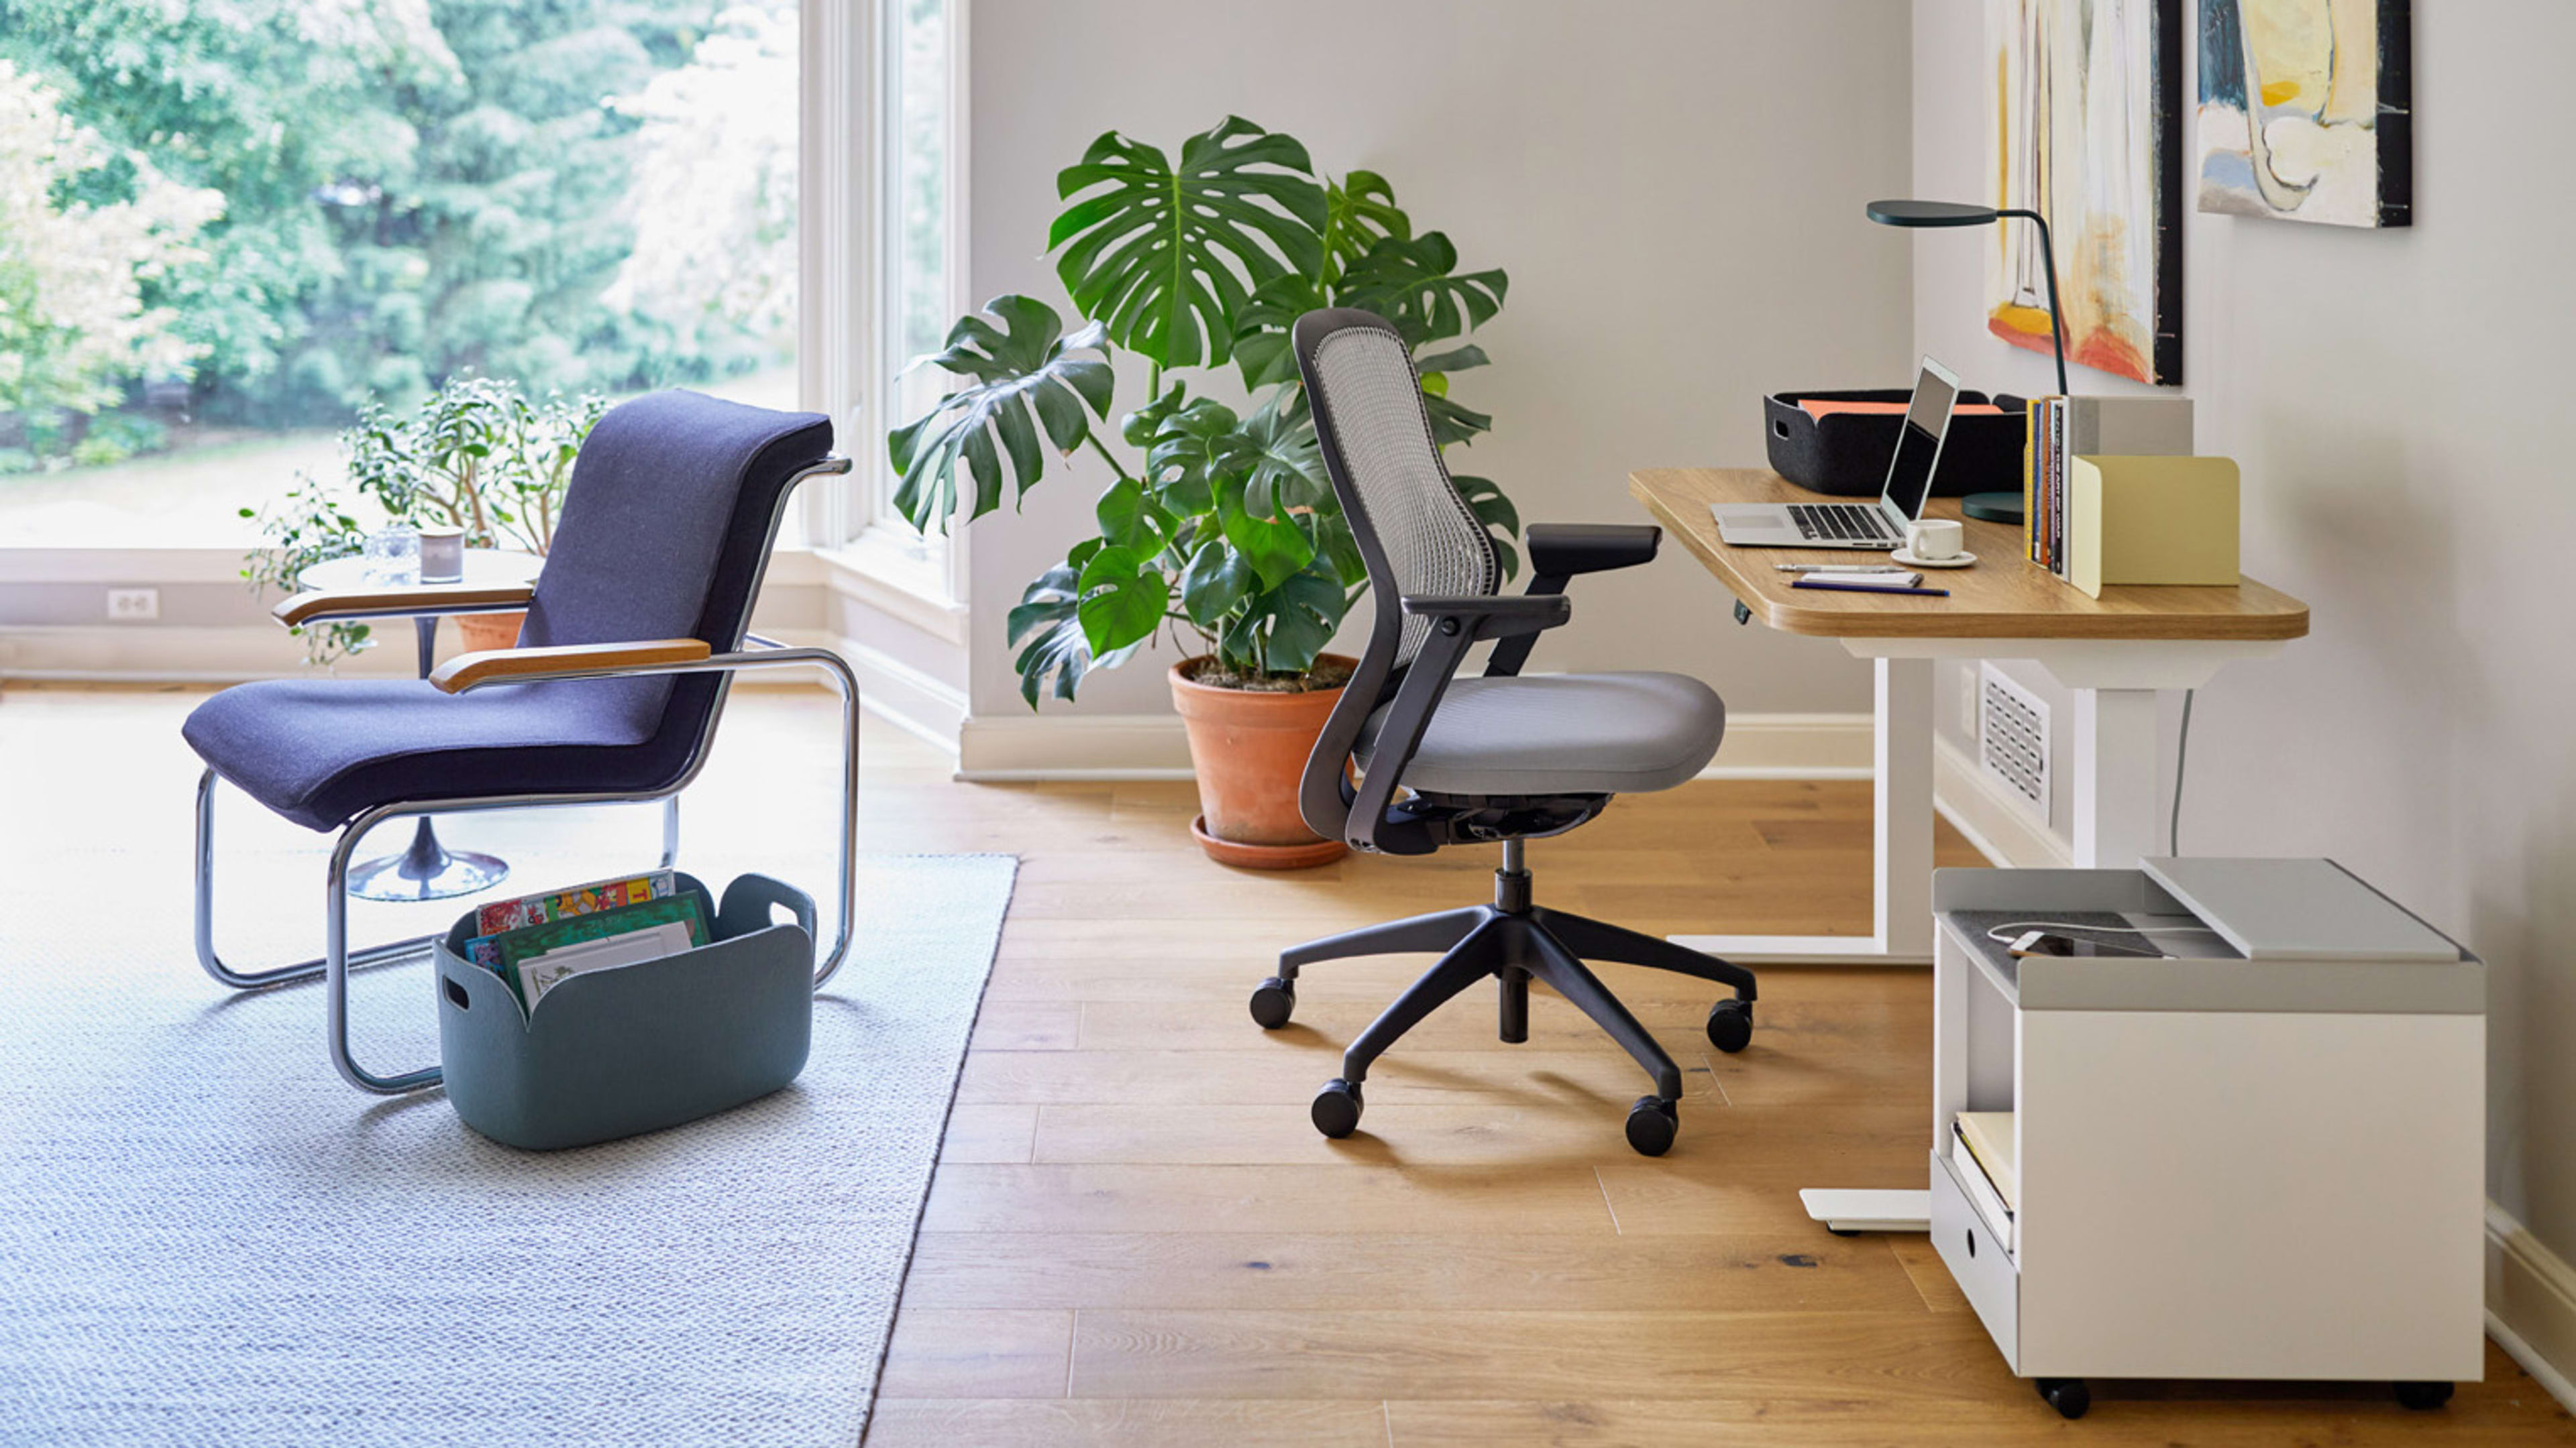 How to rethink your home office: 4 tips from a renowned furniture designer